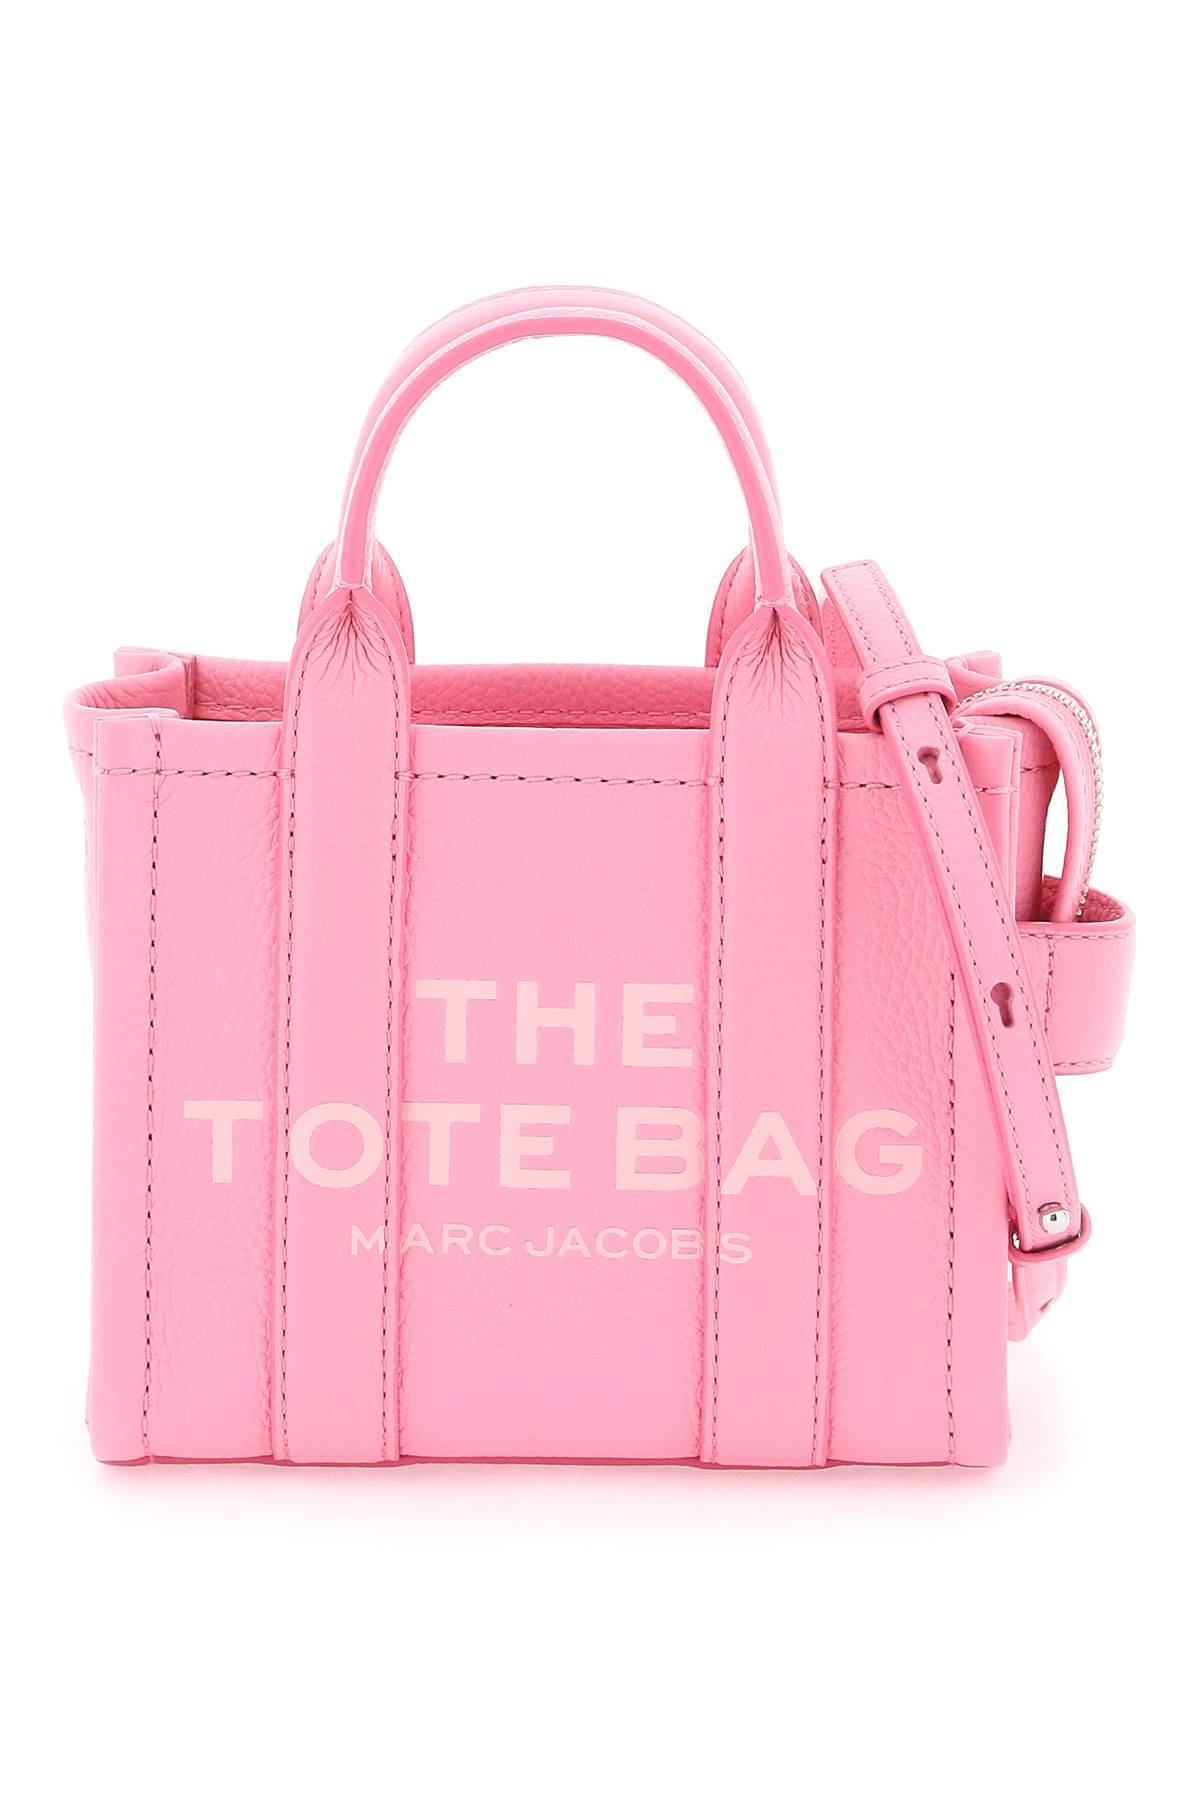 Marc Jacobs MARC JACOBS the leather mini tote bag